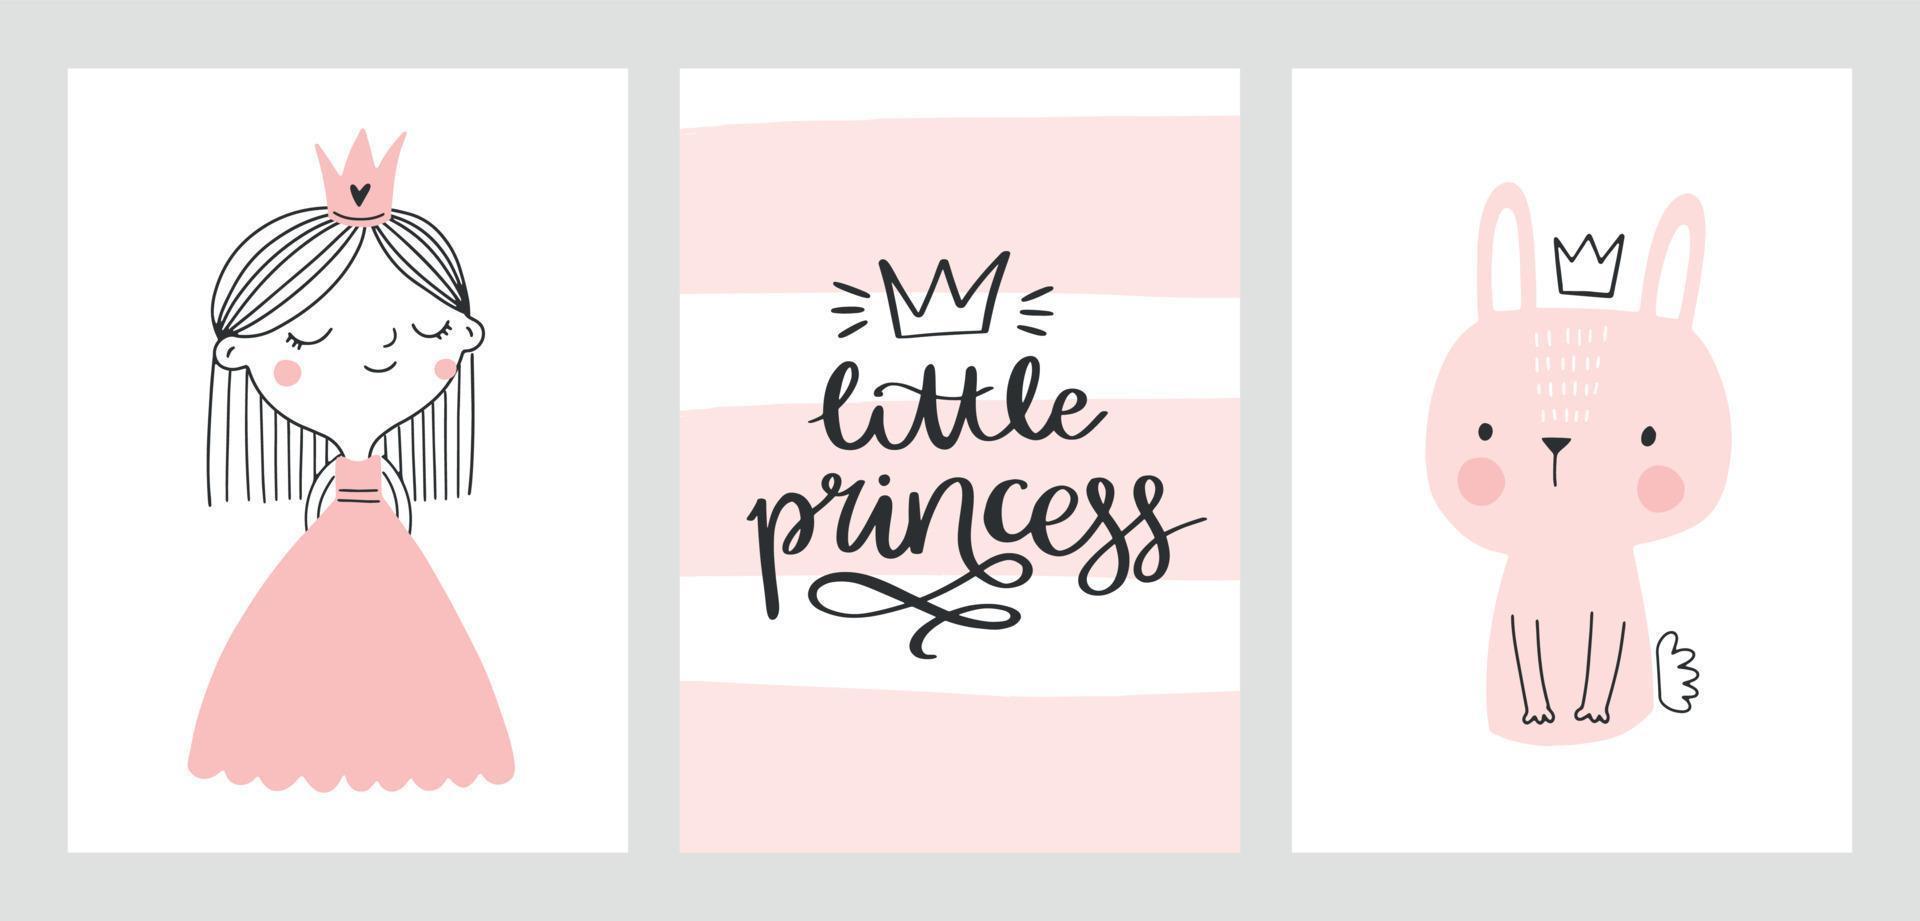 Little princess baby cards, nursery posters, baby shower invitations. Cute princess, bunny, hand drawn lettering. Scandinavian vector illustration for prints, cards, apparel.